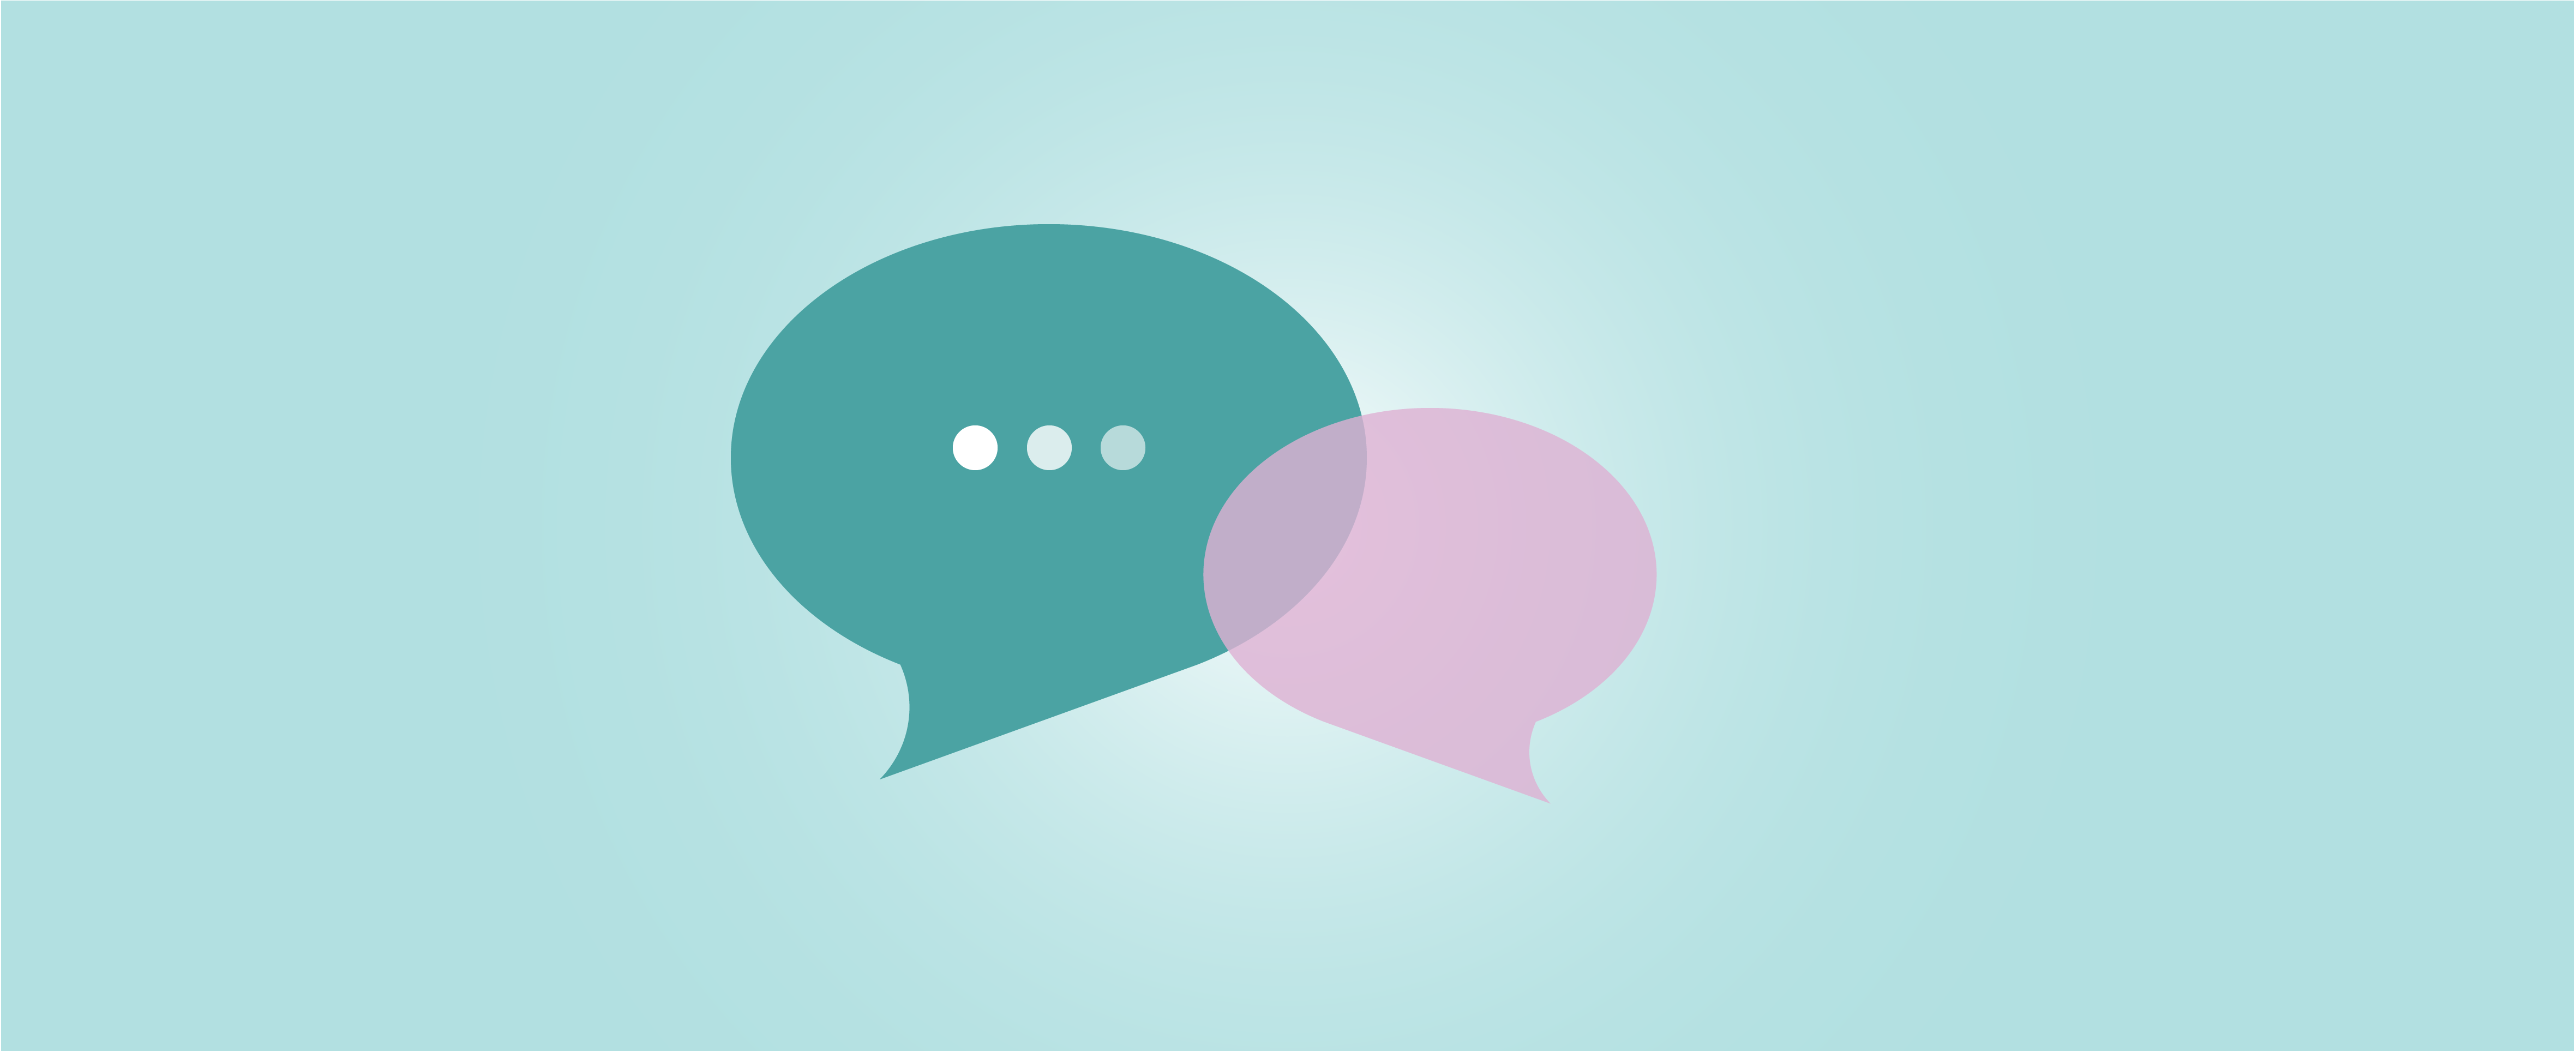 A leaders guide to difficult conversations_Blog header